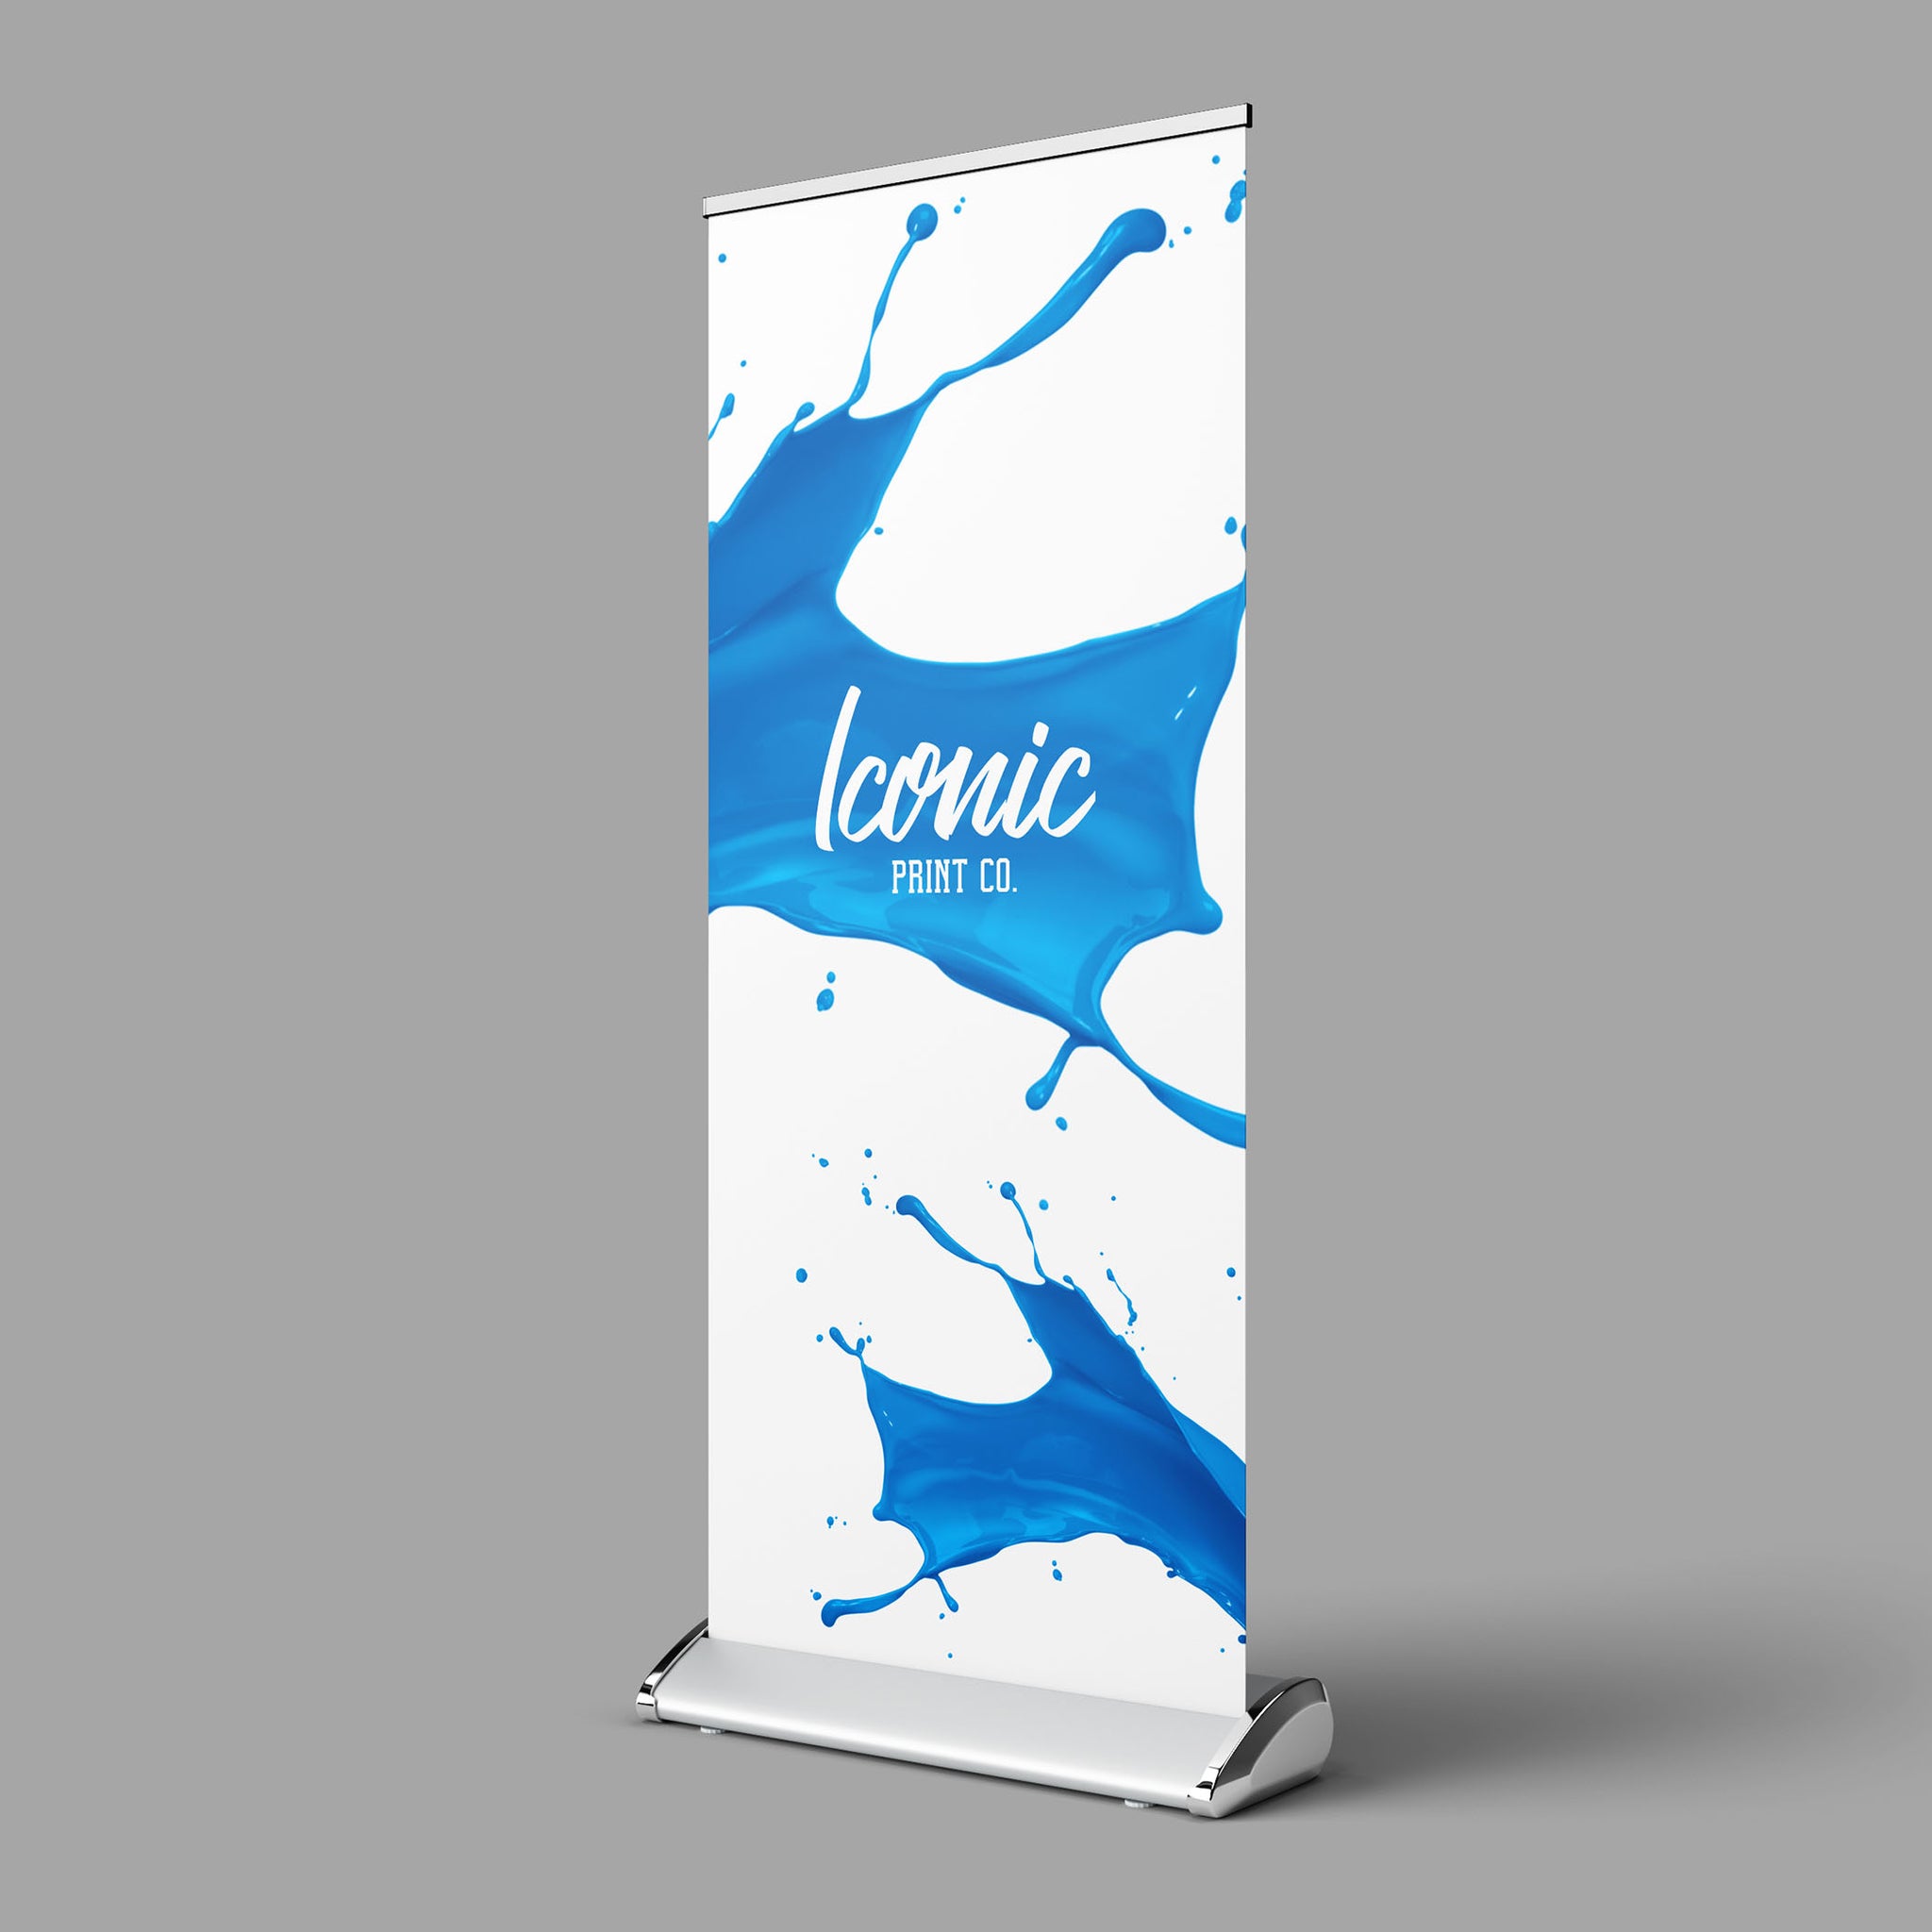  Roll Up Banner Iconic Print Co 